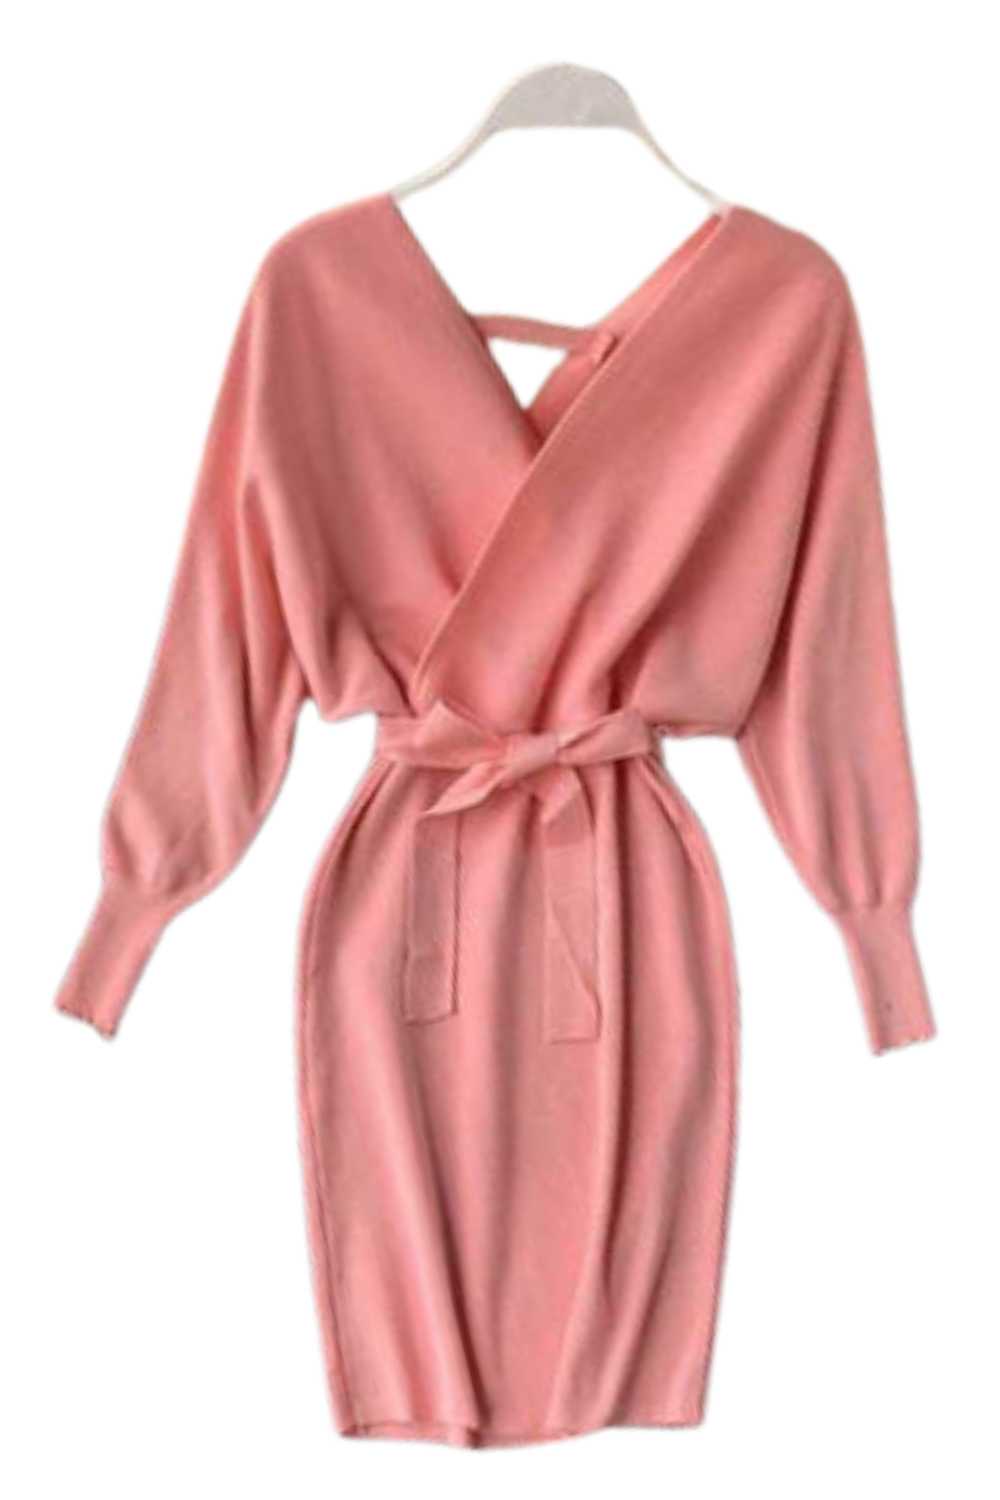 Women's Pink Knitted Wrap Dress - A.A.Y FASHION